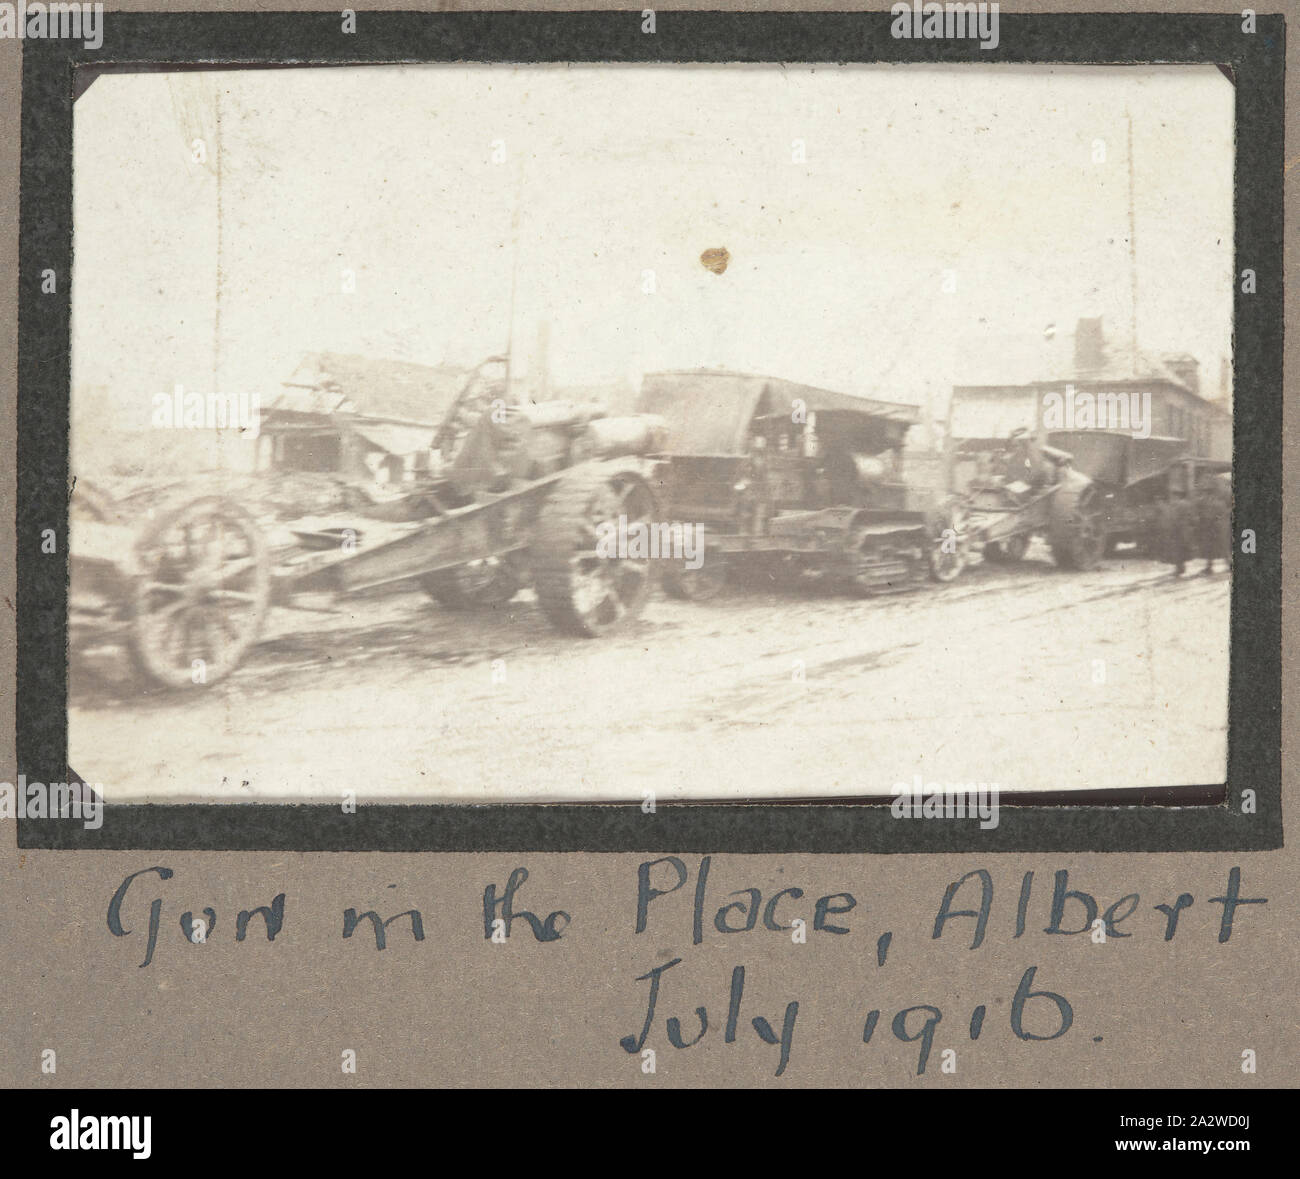 Photograph - Military Guns in Convoy, Albert, France, Sergeant John Lord, World War I, 1916, Photographic print which depicts a convoy of military vehicles standing stationary along a street in Albert. The small French town of Albert was used by the Allied forces during 1916 as the major control centre for the planning of the Battle of the Somme. The headquarters of the Australian divisions were also temporarily based at Albert due to the heavy fighting that was taking place close by Stock Photo